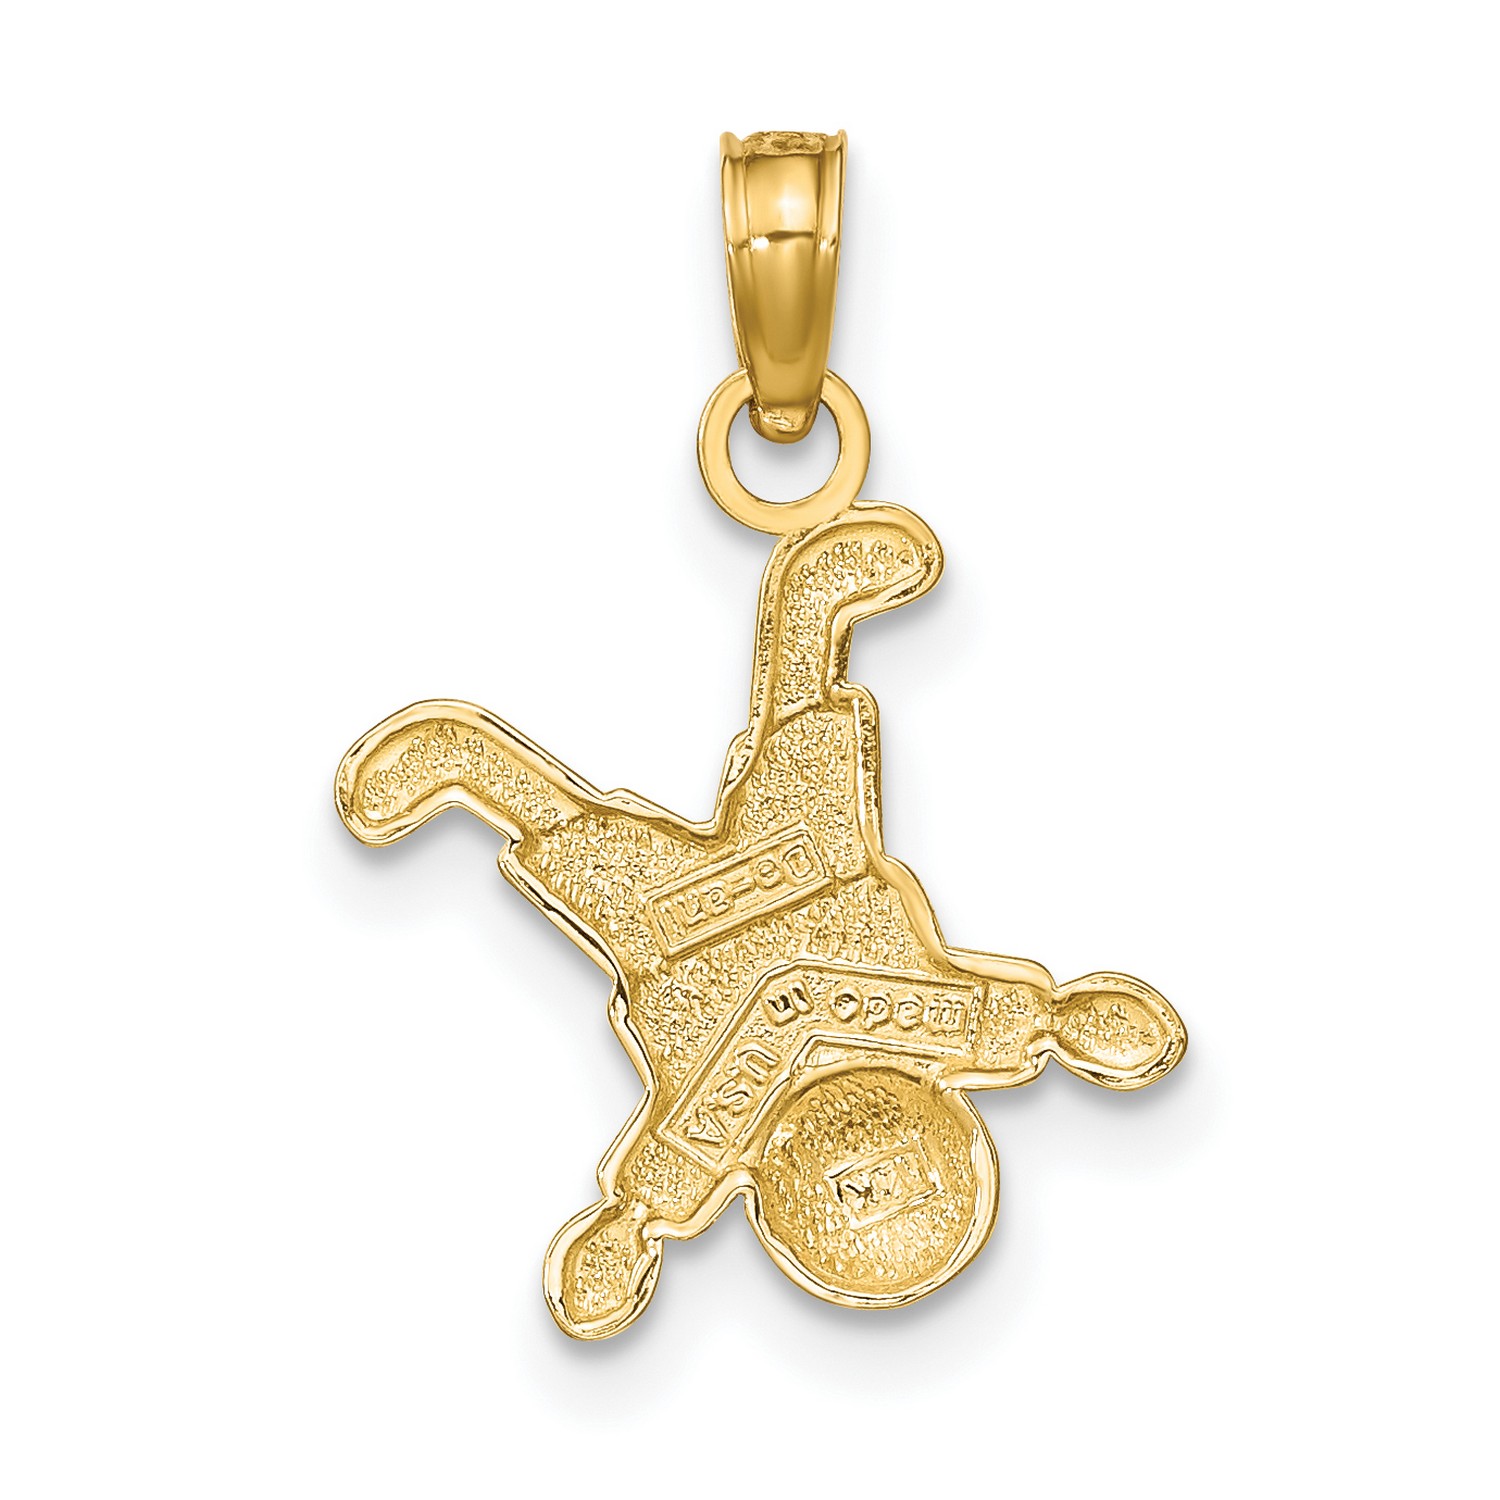 Little Boy Charm Pendant In Real 14k Yellow Gold 12 mm x 11 mm 0.72gr ...